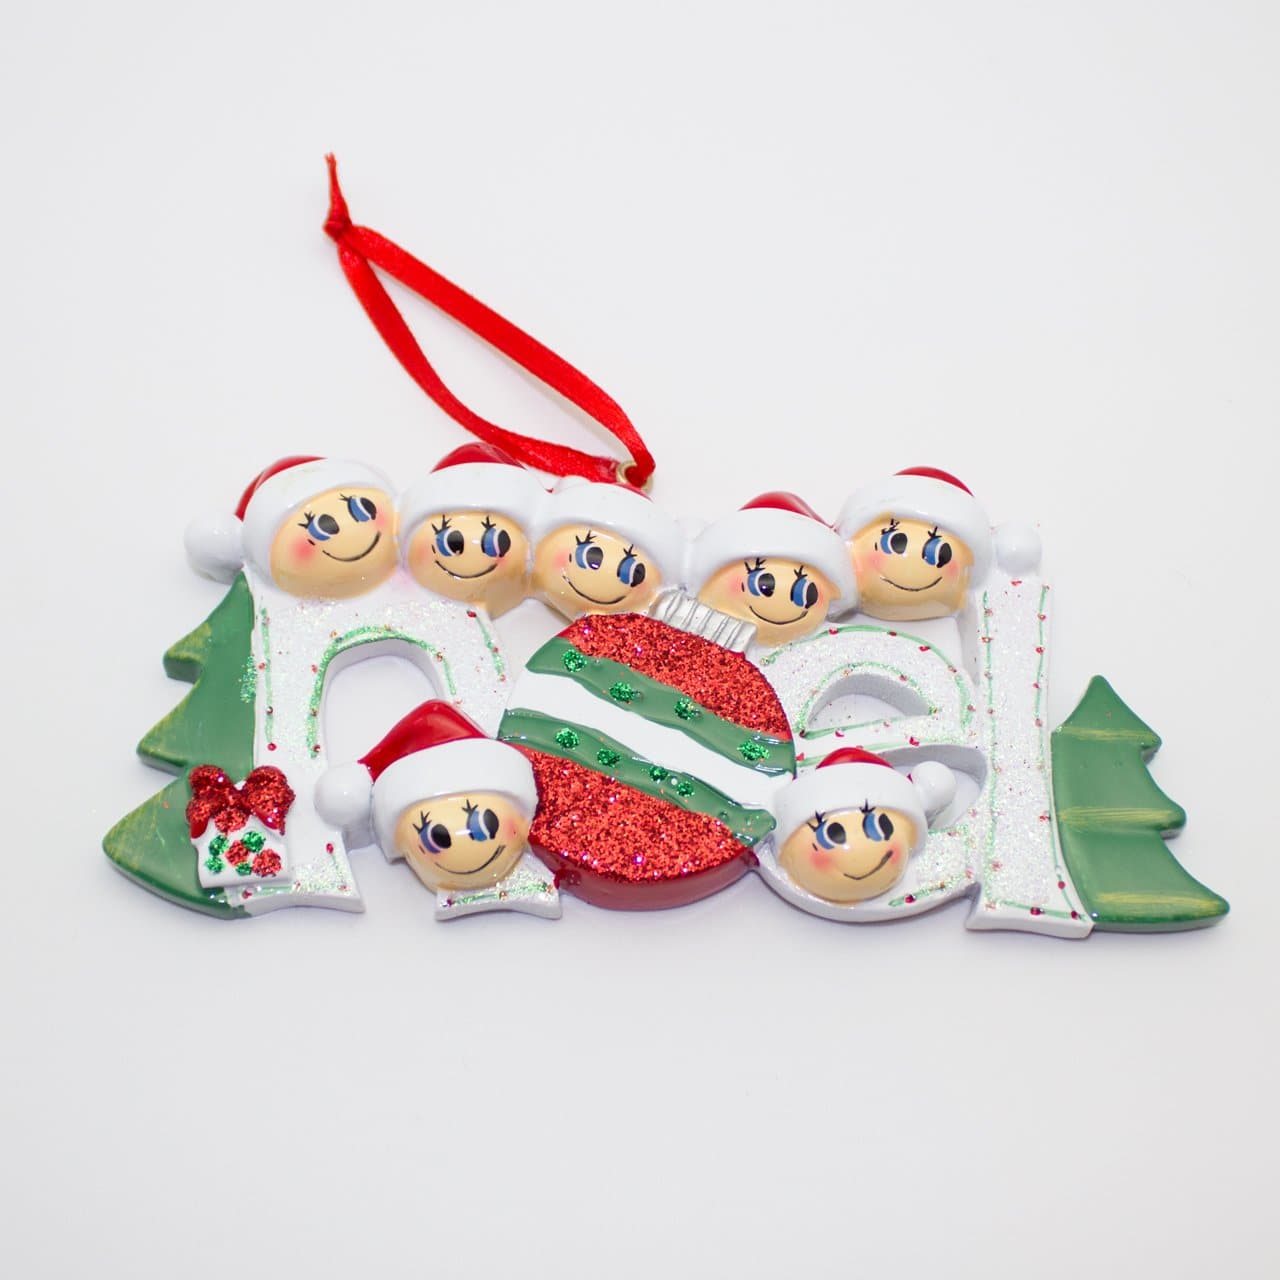 Noel Glitter - Christmas Ornament (Suitable for Personalization)